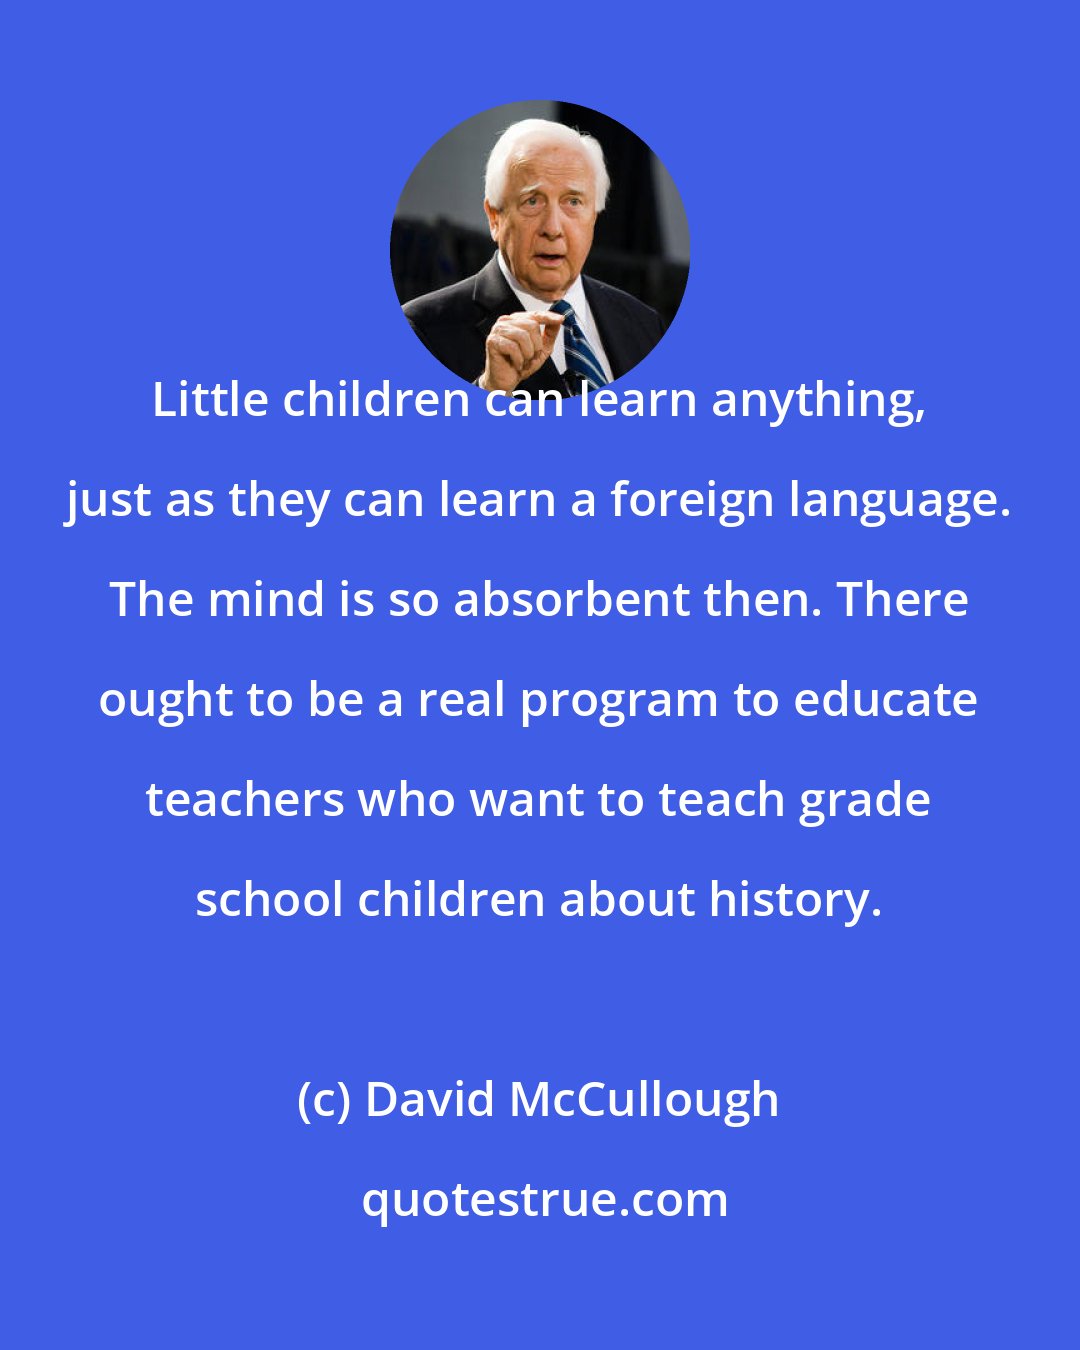 David McCullough: Little children can learn anything, just as they can learn a foreign language. The mind is so absorbent then. There ought to be a real program to educate teachers who want to teach grade school children about history.